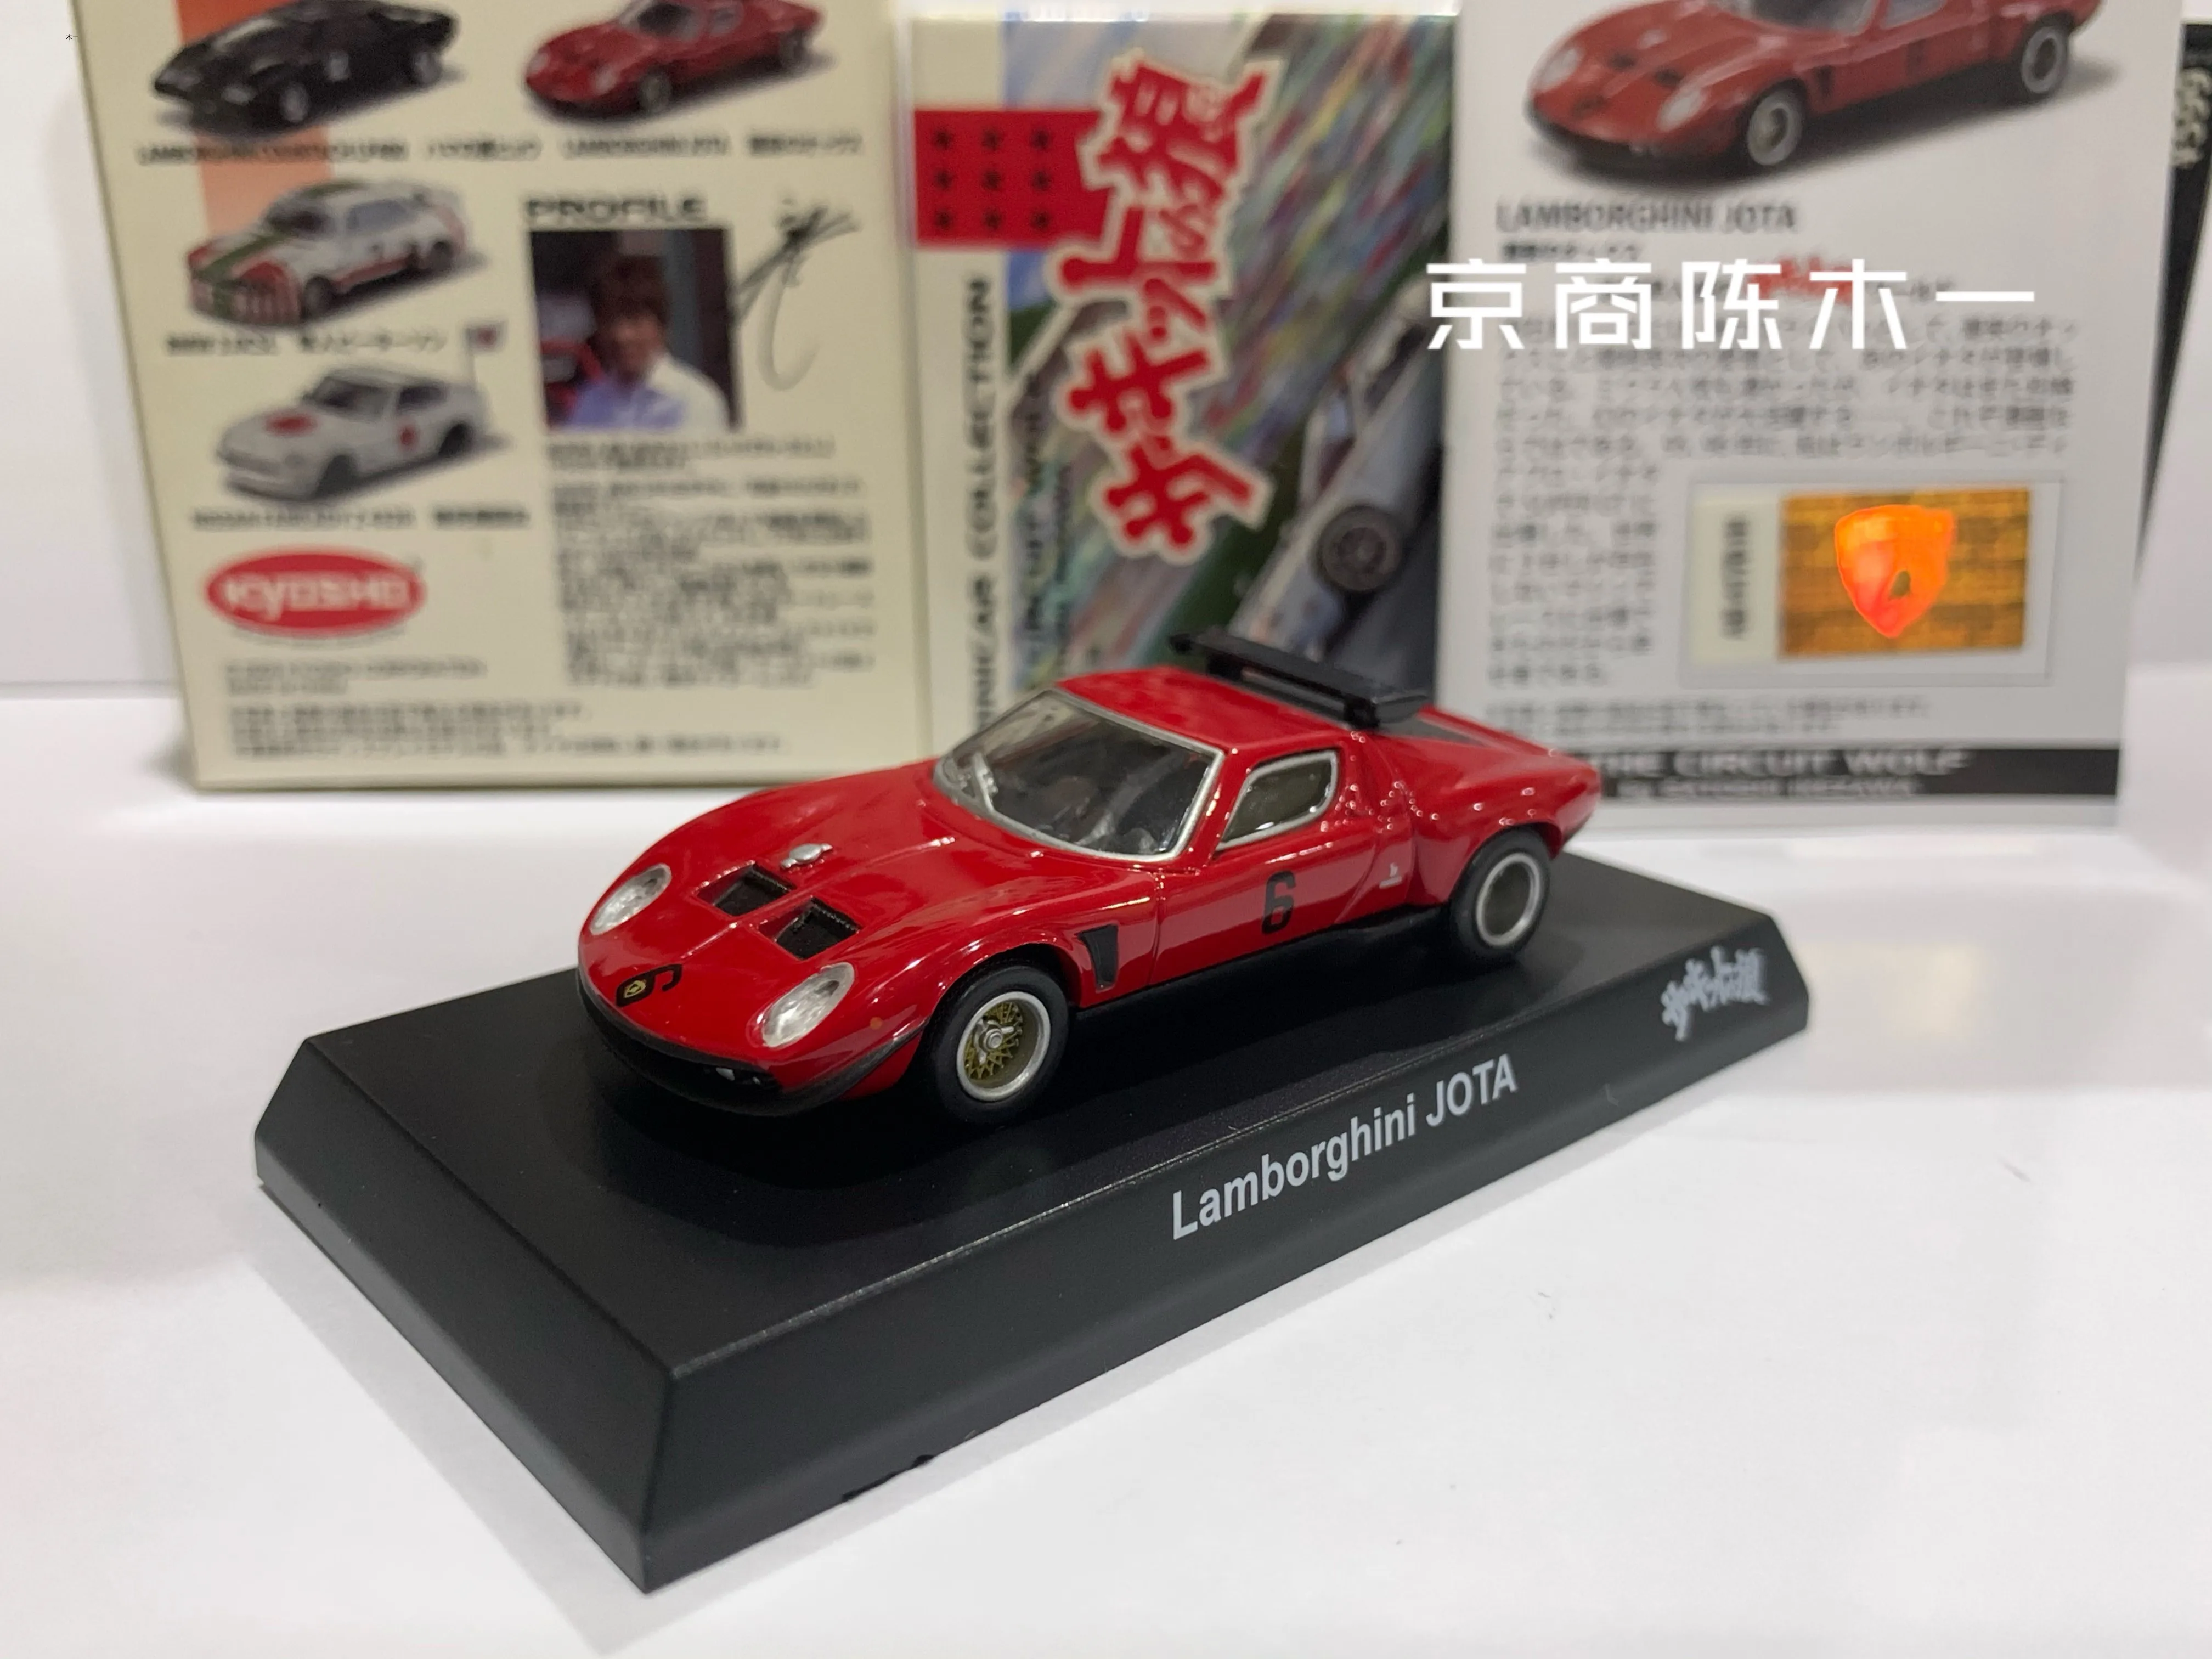 

1/64 KYOSHO Lamborghini Jota Miura Cartoon The Wolf in lap time Collection of die-cast alloy car decoration model toys